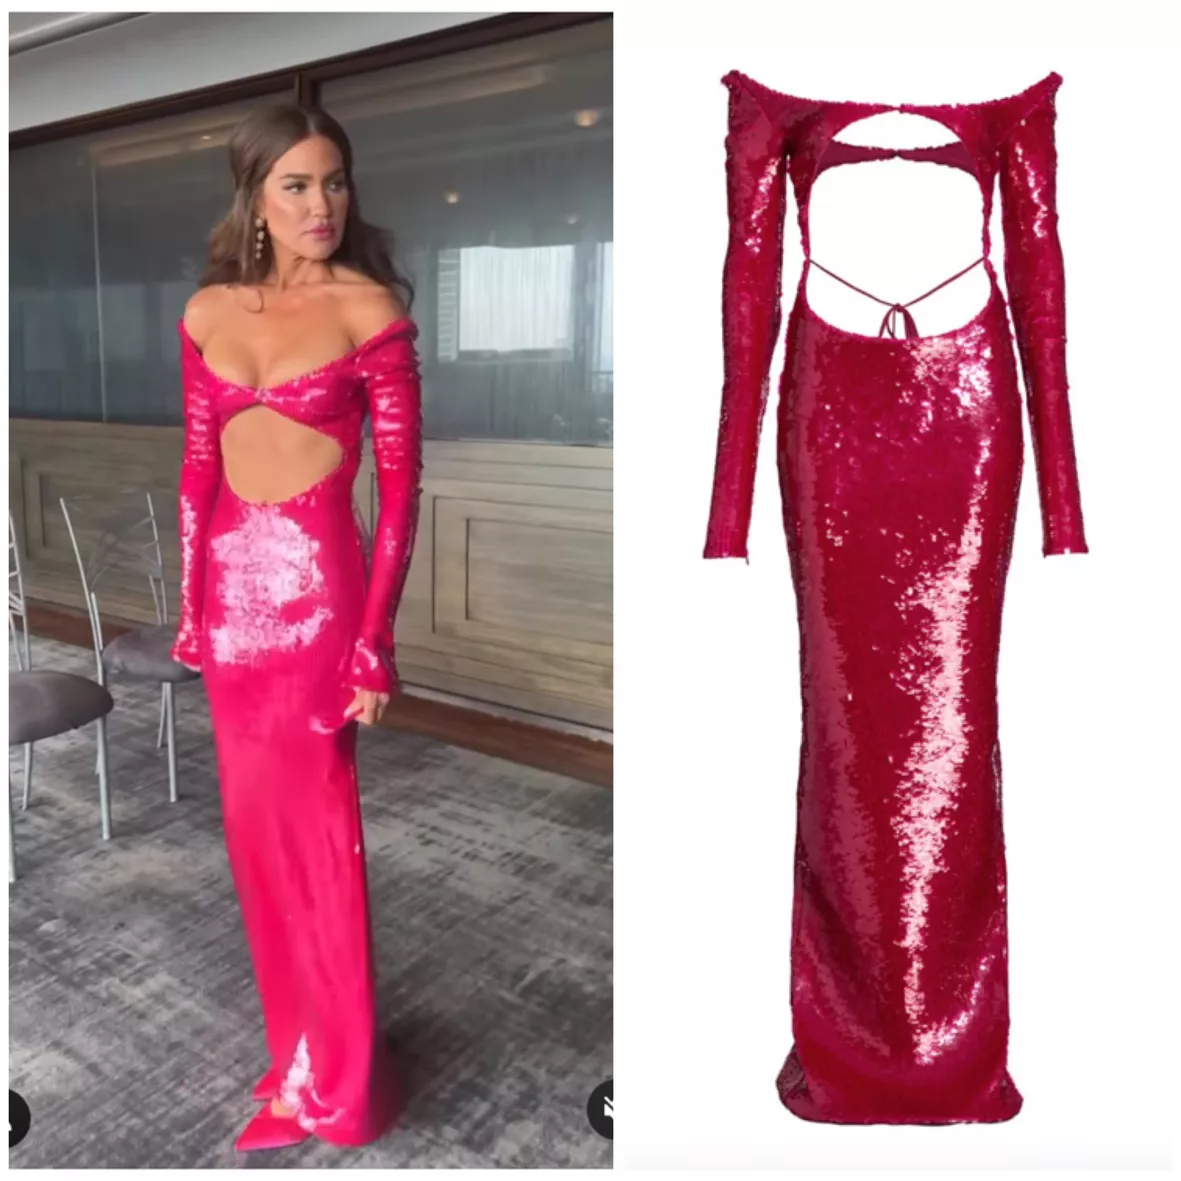 Brynn Whitfield's Pink Sequin Cutout Gown